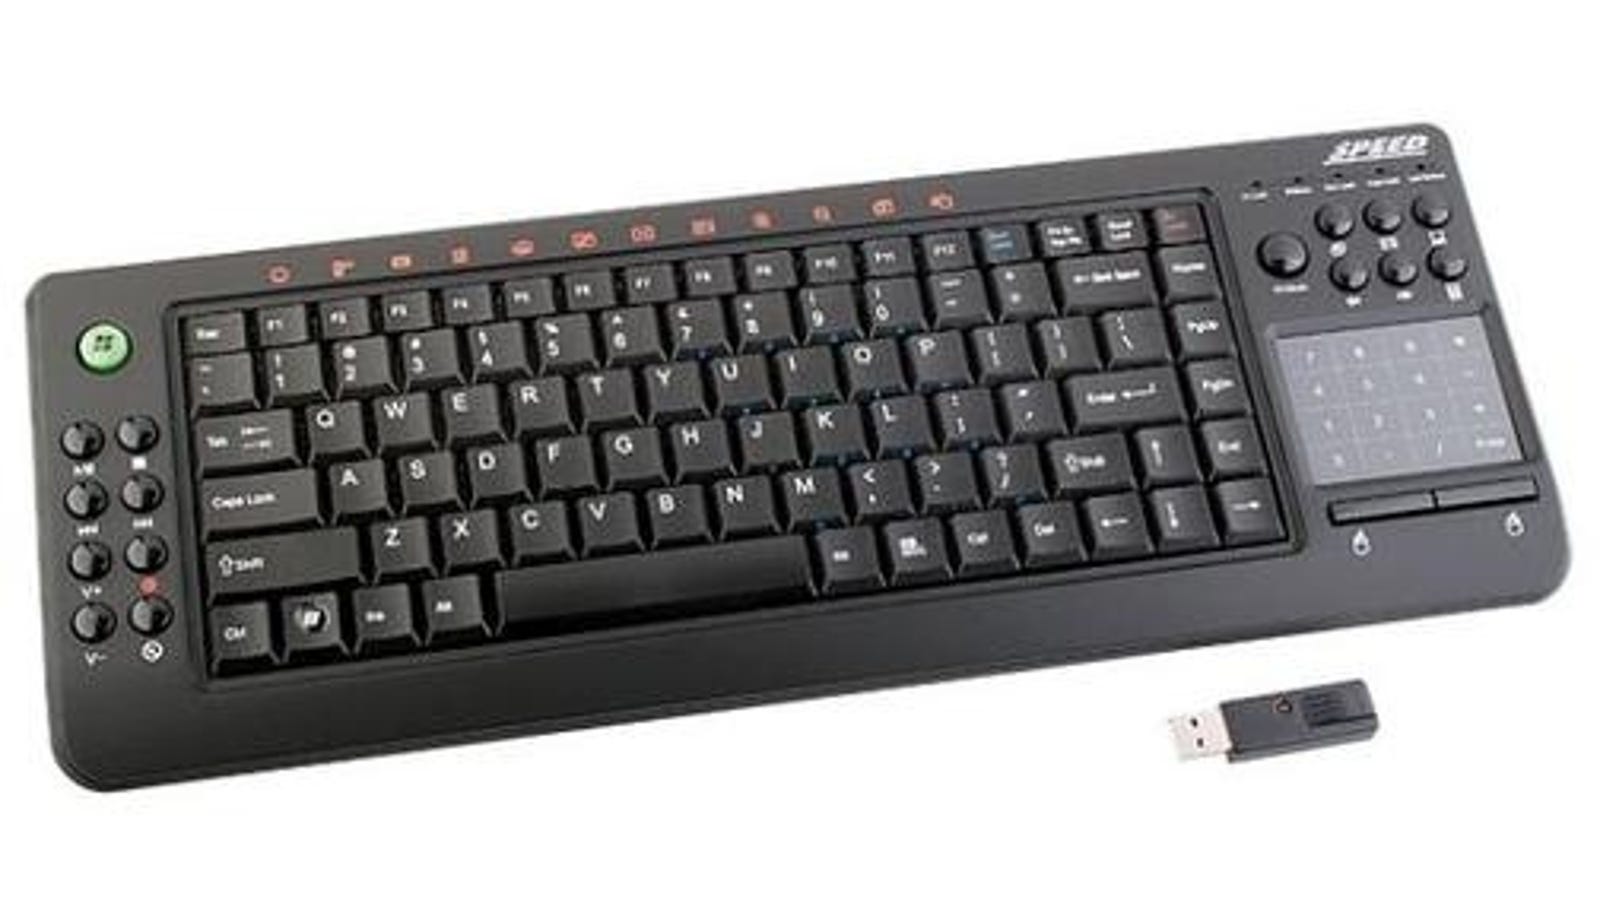 Bluetooth keyboard with number pad